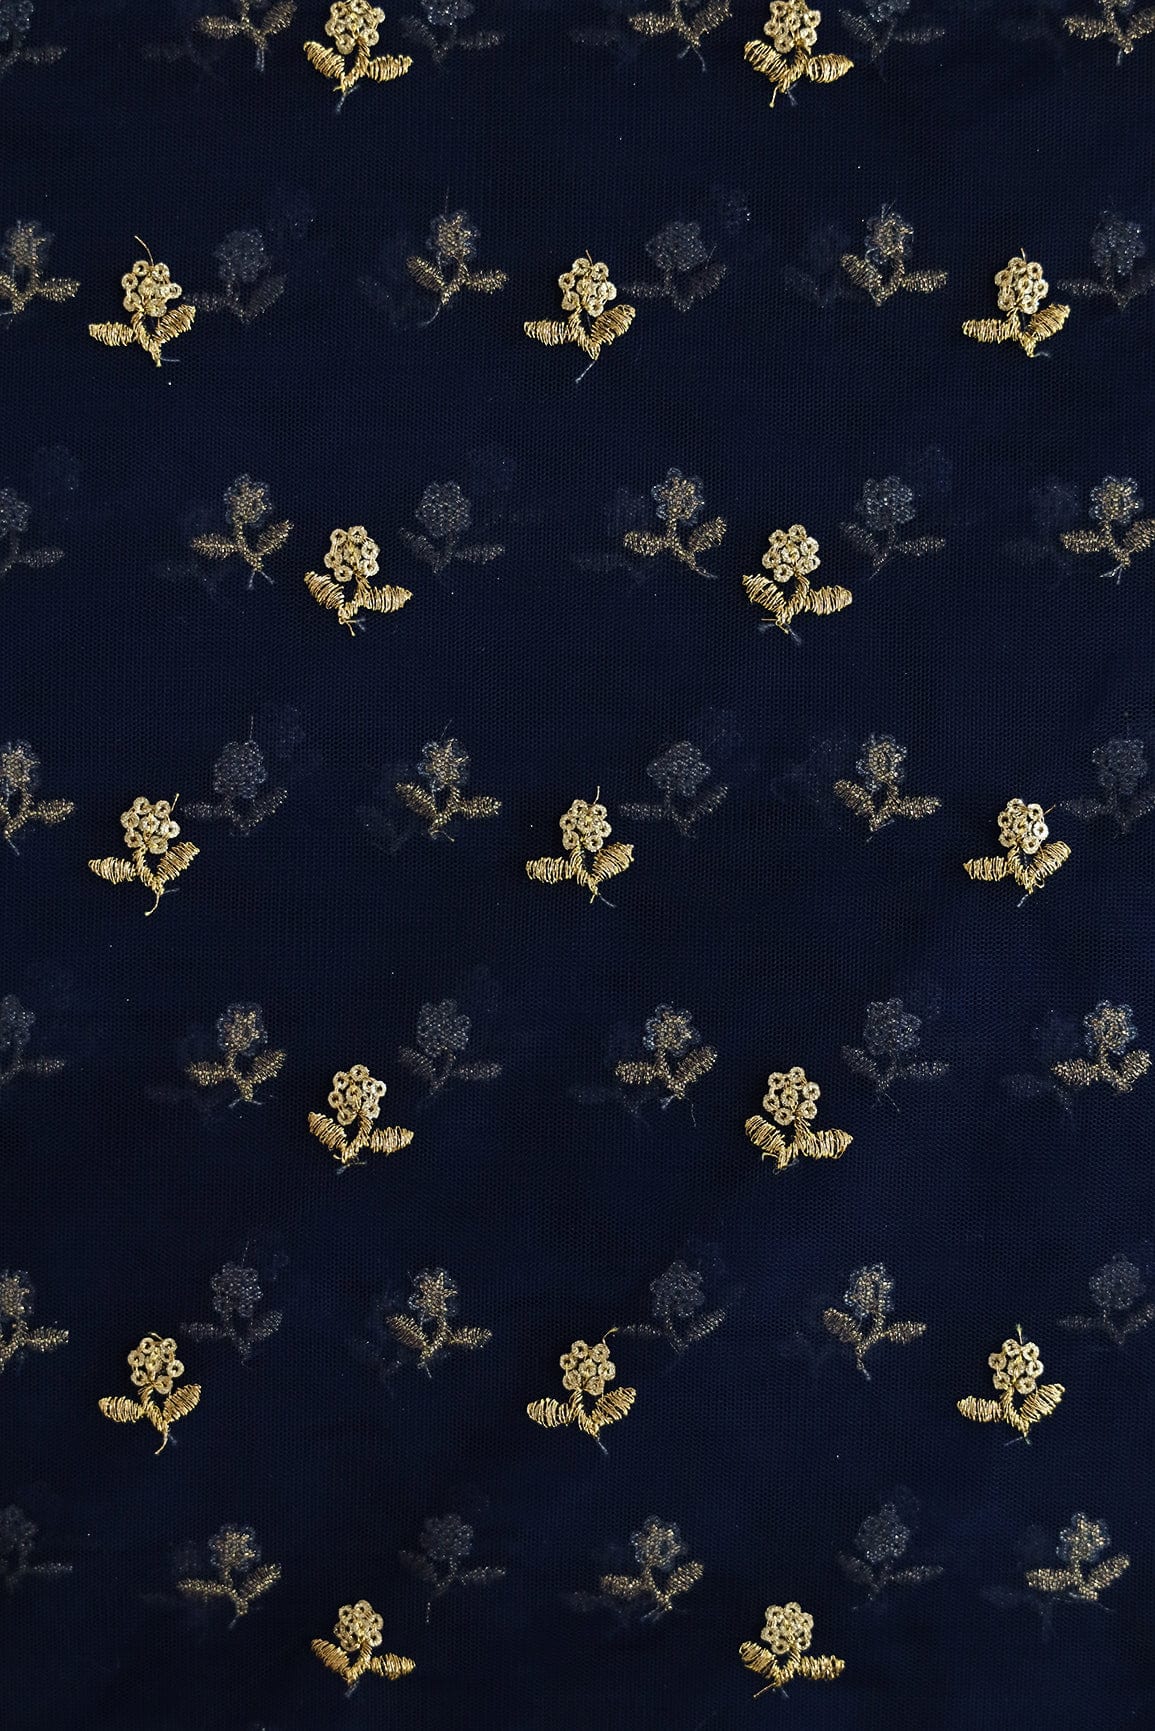 doeraa Embroidery Fabrics Gold Sequins With Gold Zari Floral Booti Embroidery Work On Navy Blue Soft Net Fabric